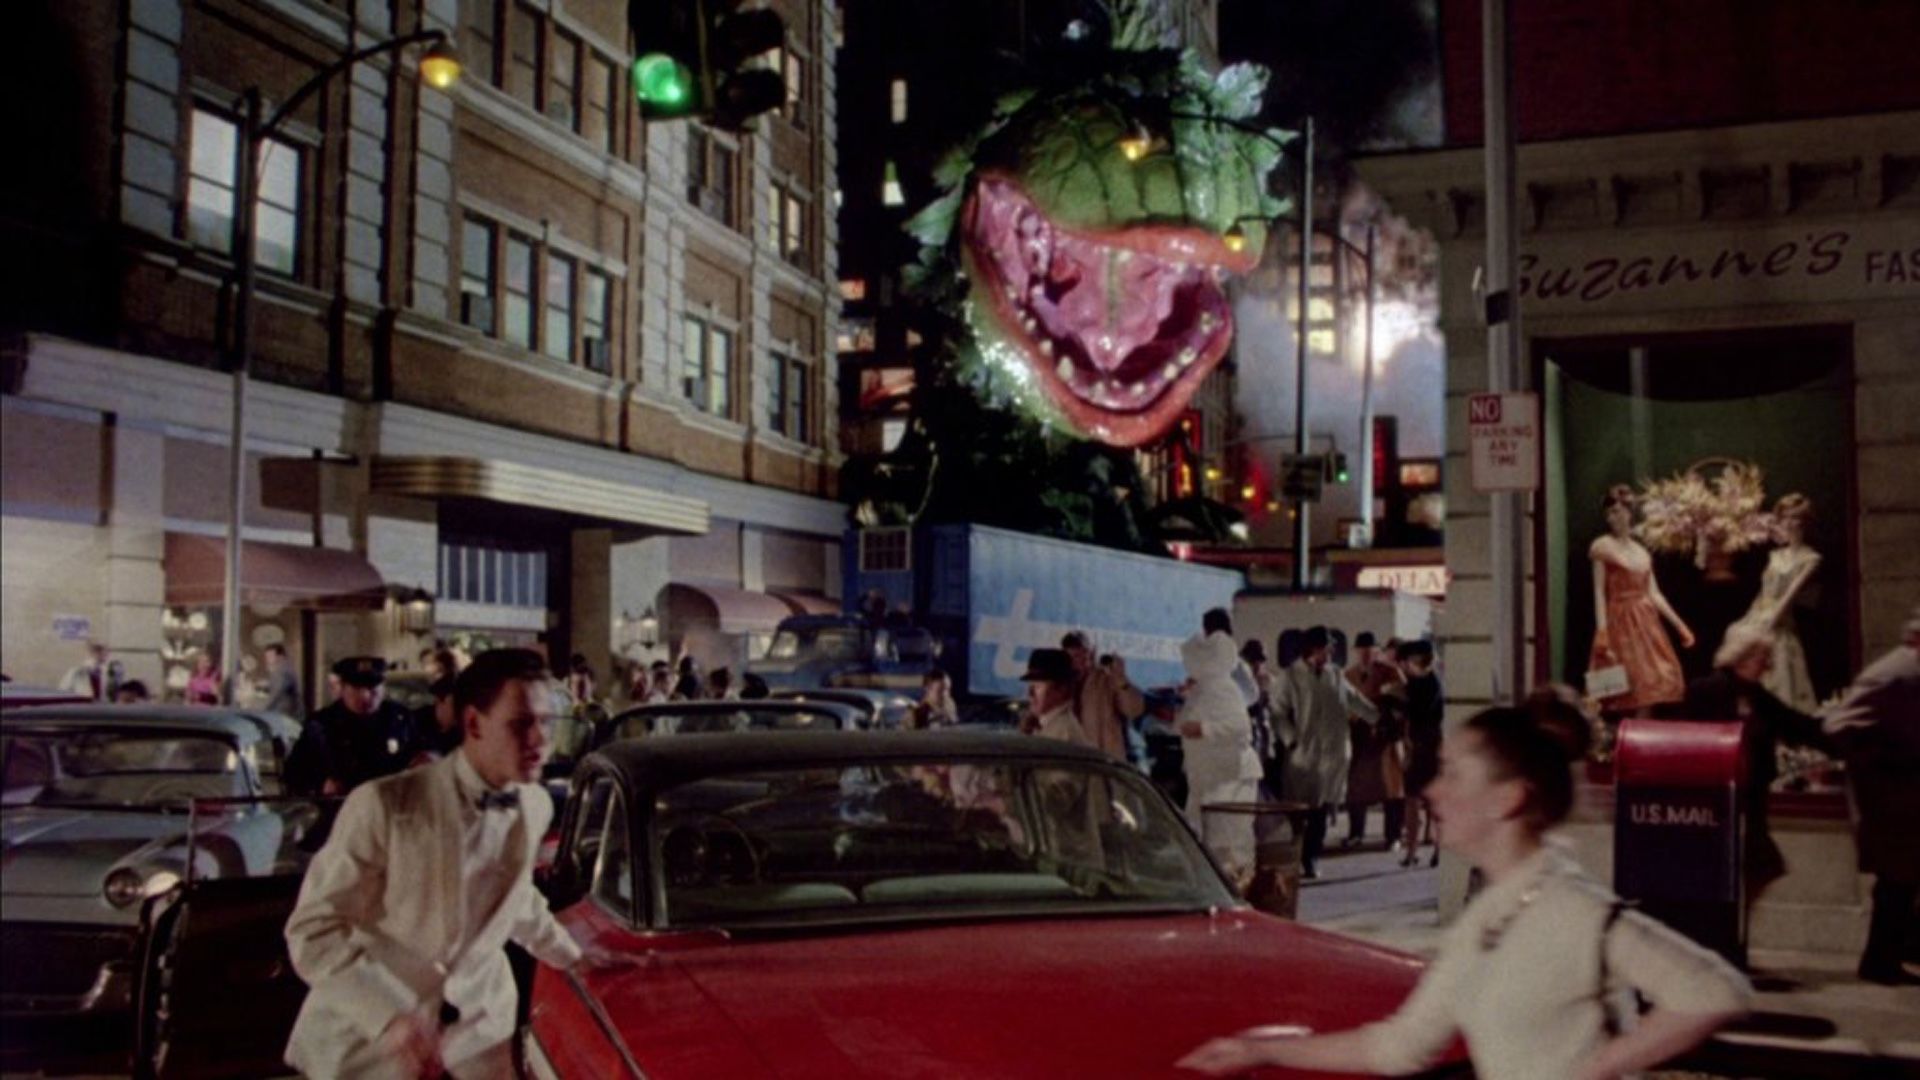 LITTLE SHOP OF HORRORS: THE DIRECTORS CUT is Coming to Theaters